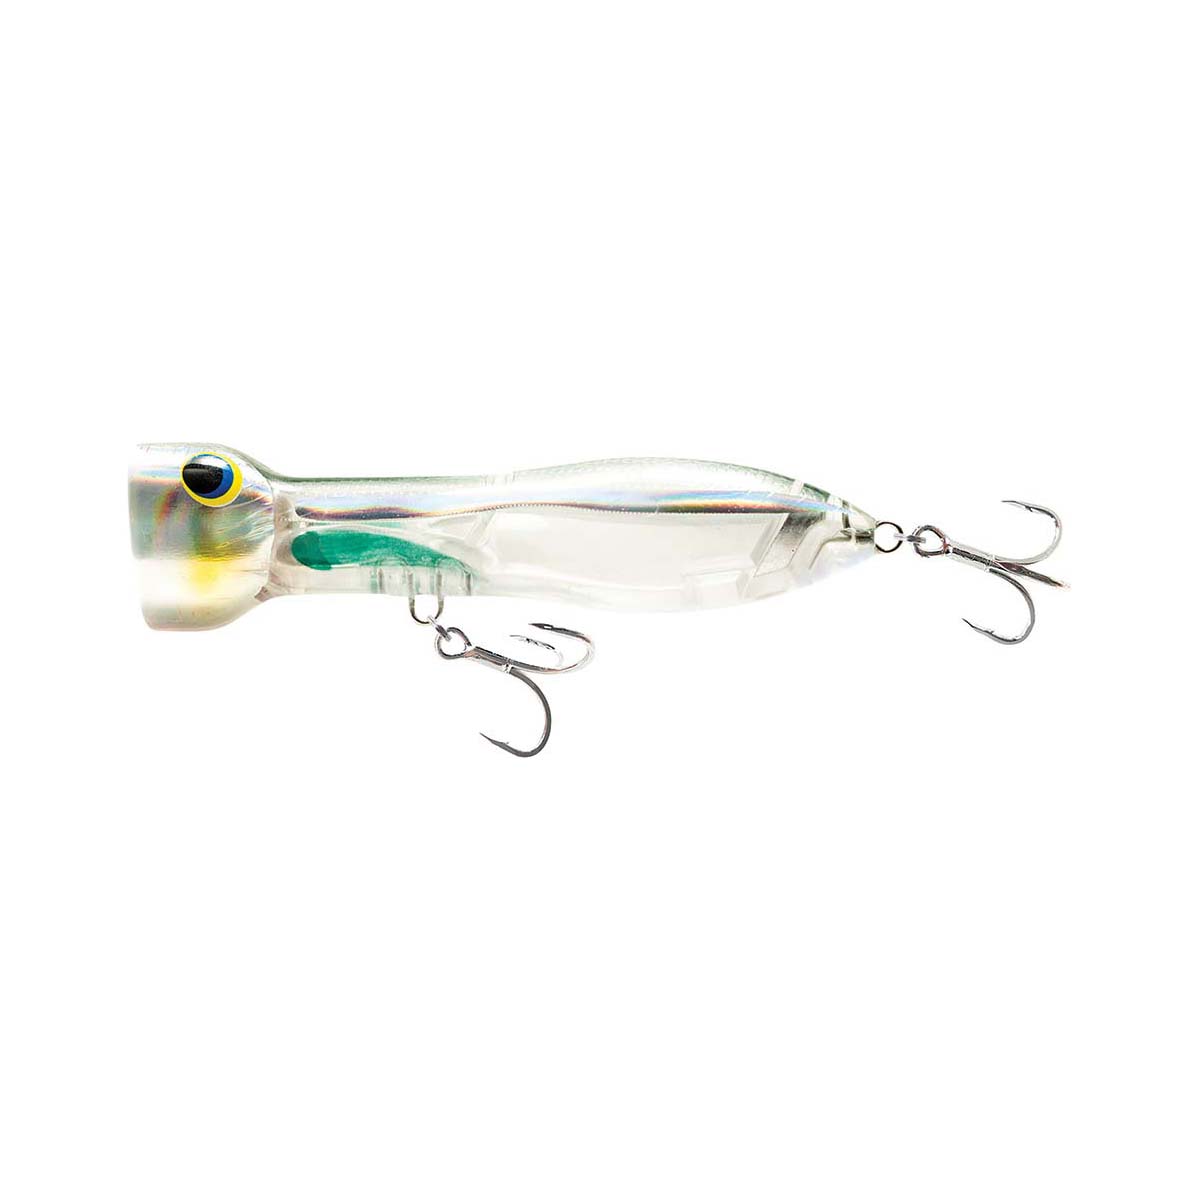 Nomad Chug Norris Surface Popper Lure 9.5cm Holo Ghost Shad